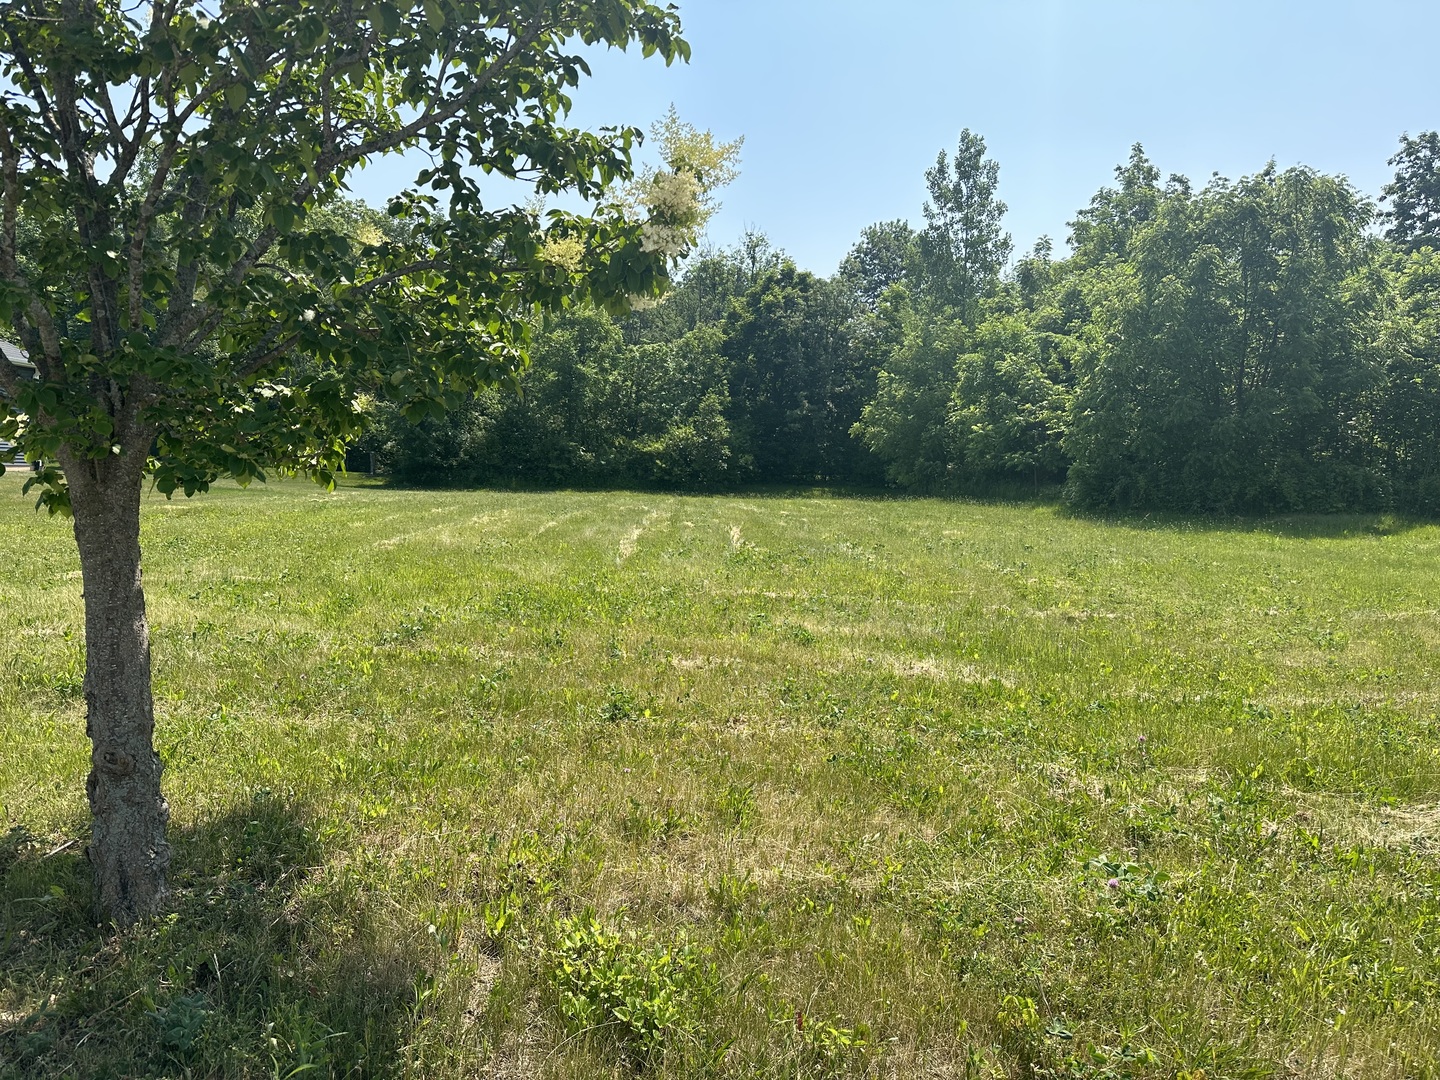 a view of open space and a yard